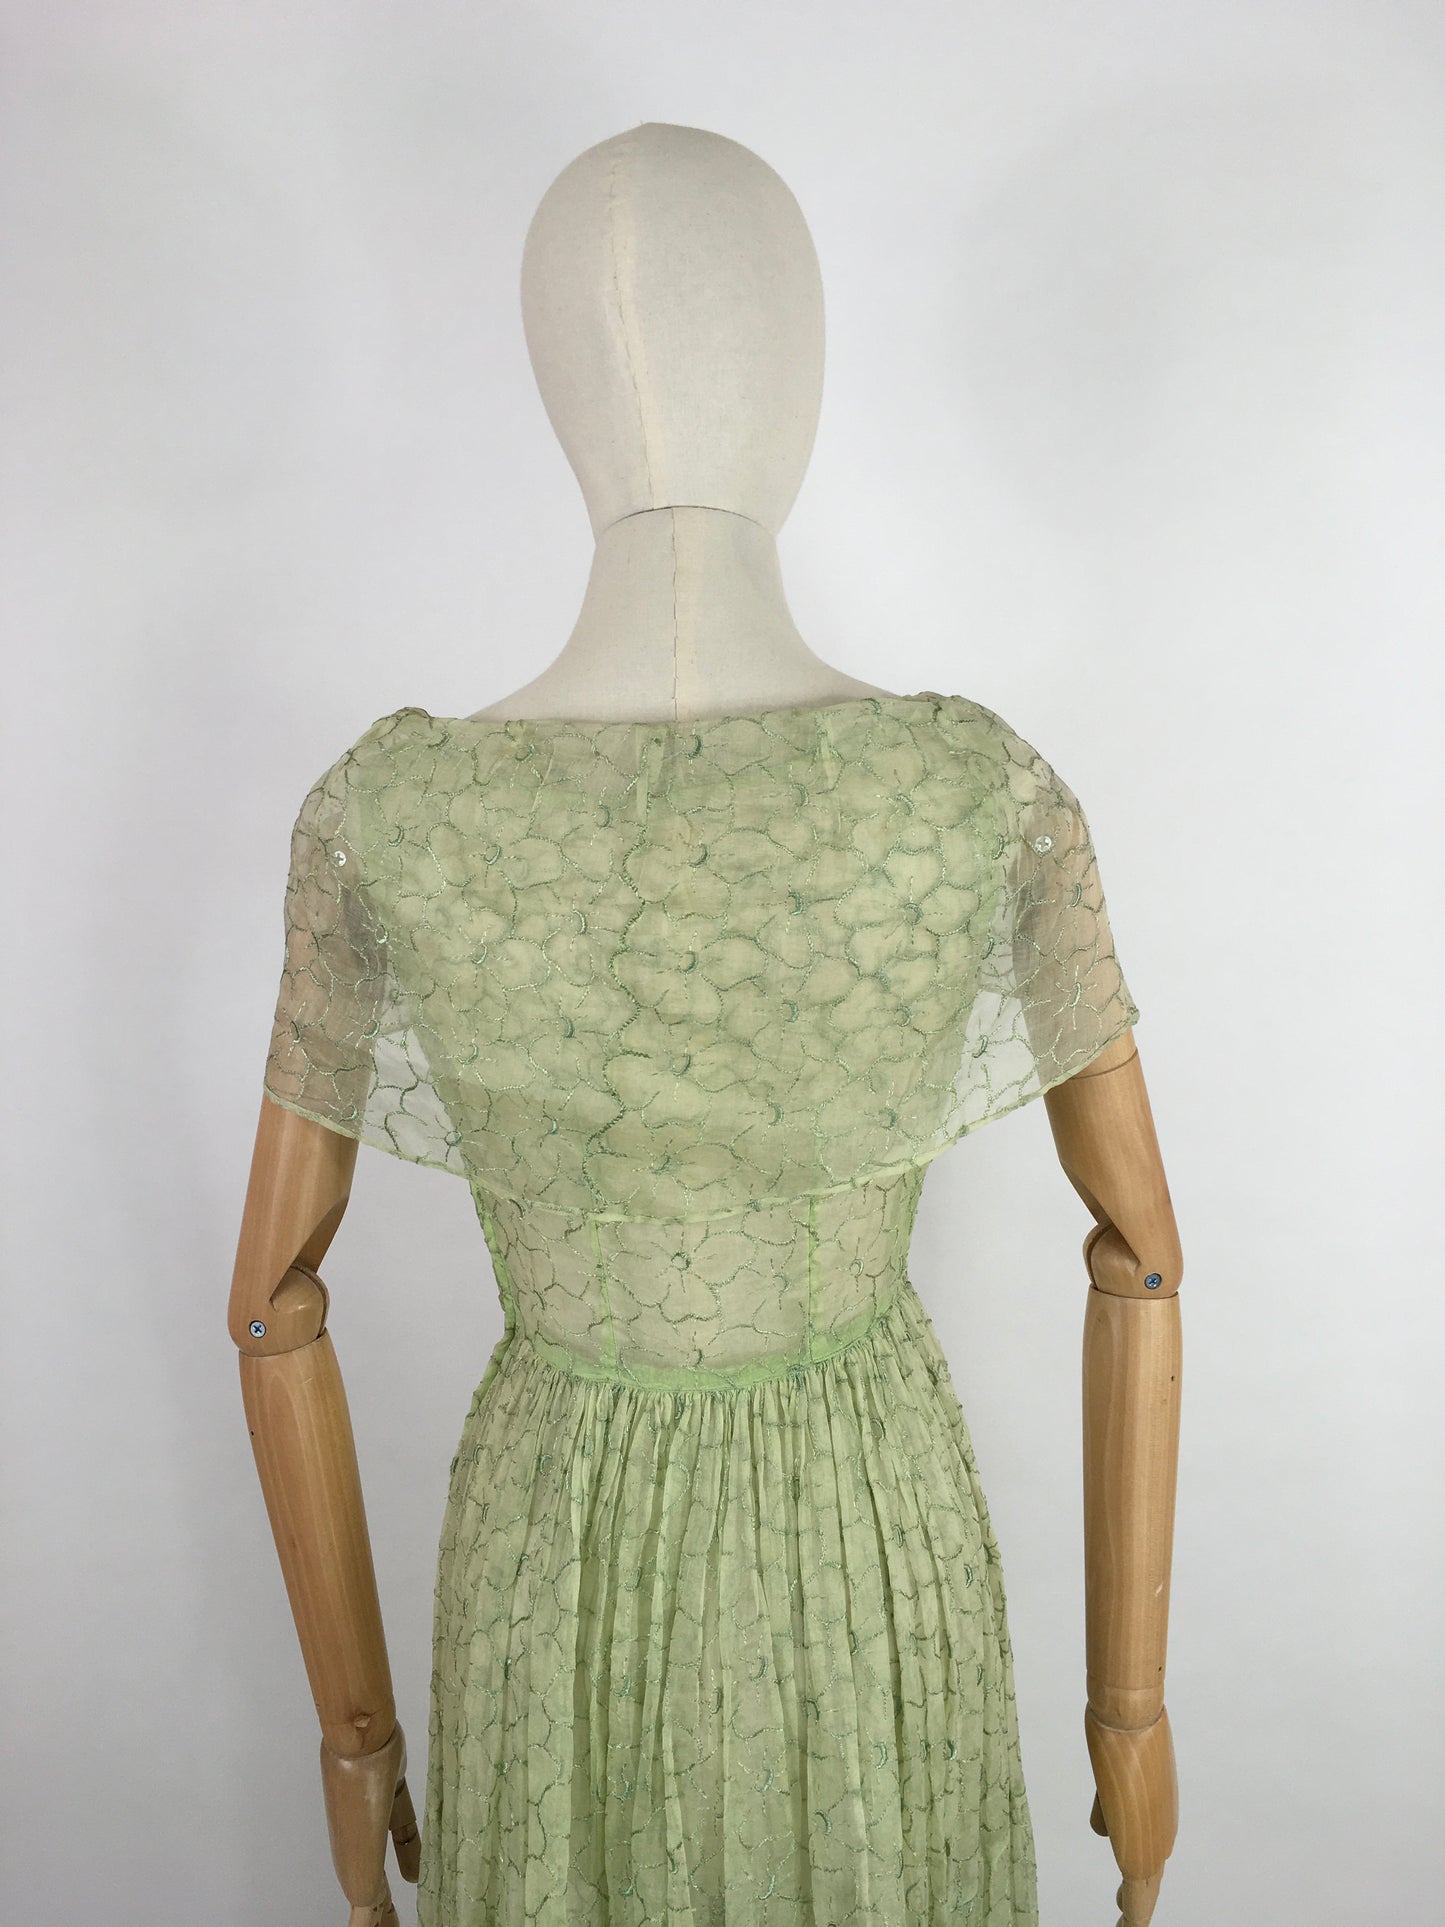 Original 1930s Full Length Summer Dress - In a Beautiful Soft Green Embroidered Cotton Lawn